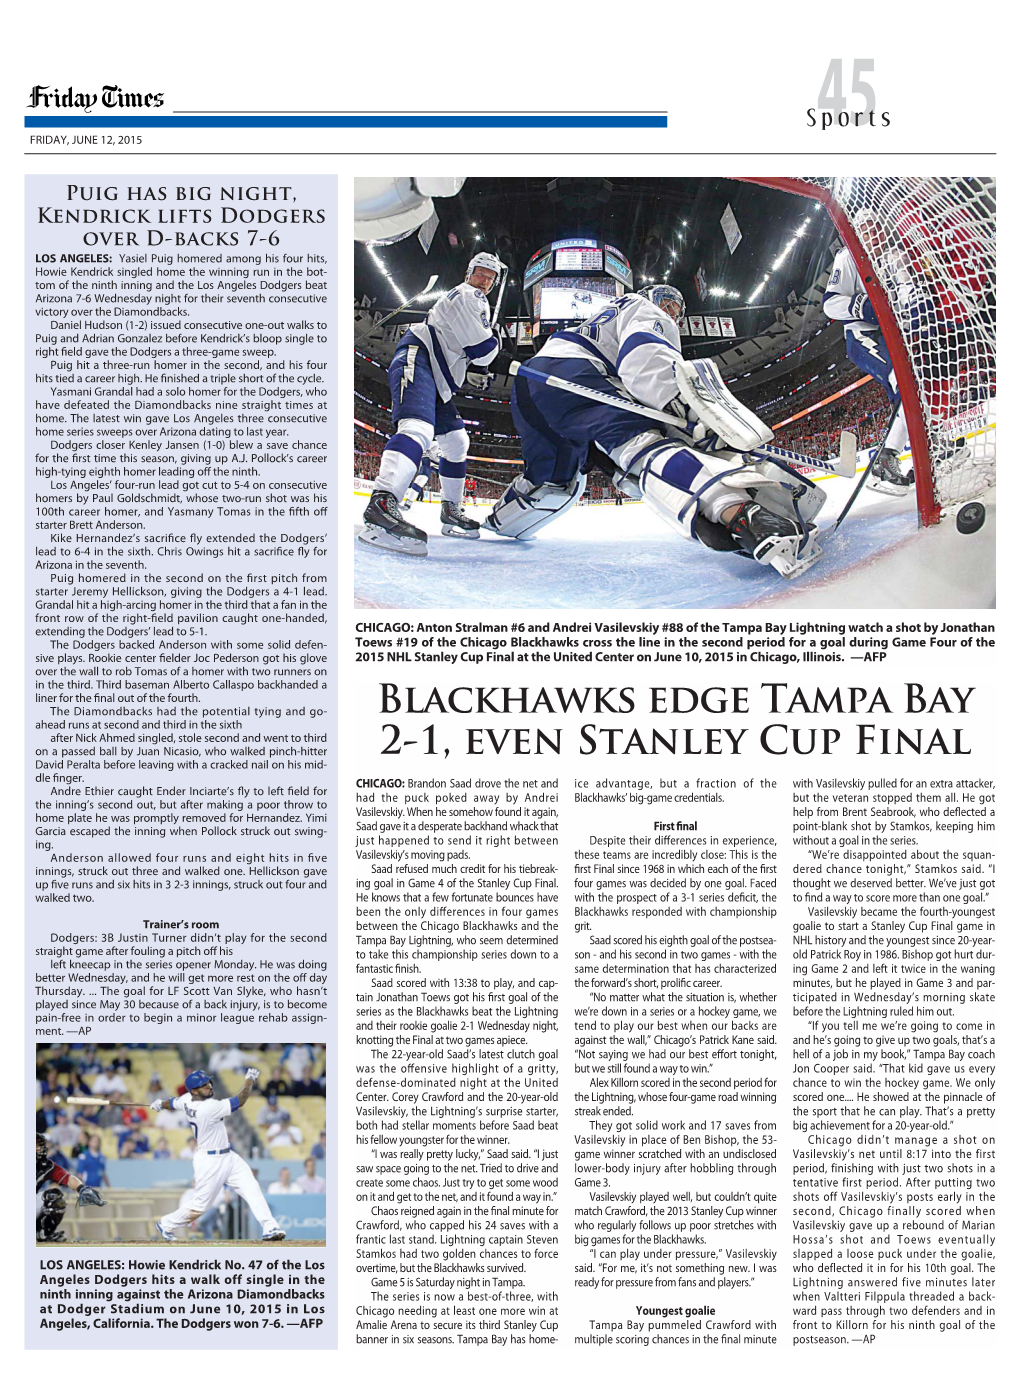 Blackhawks Edge Tampa Bay 2-1, Even Stanley Cup Final